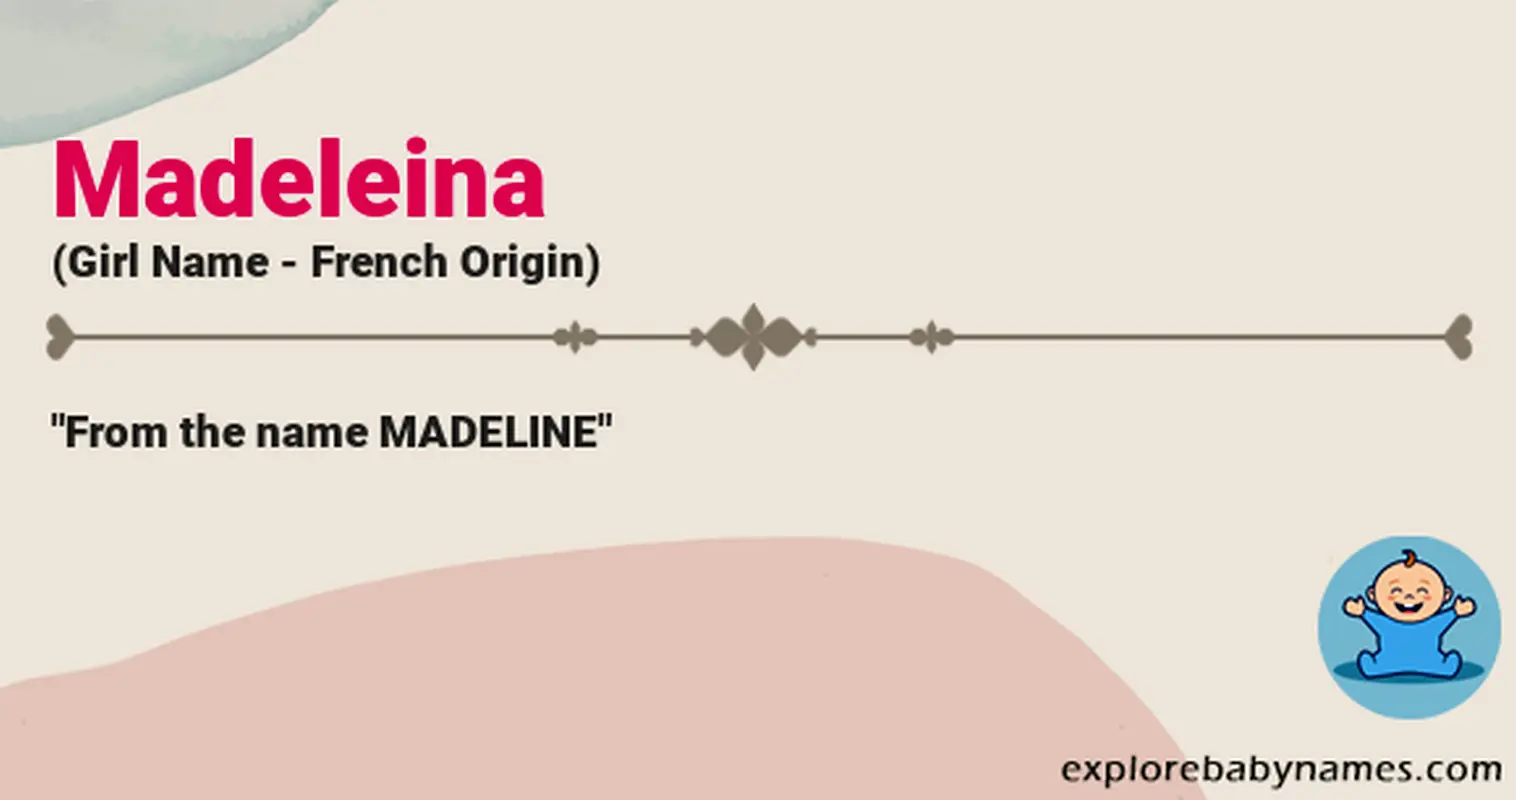 Meaning of Madeleina